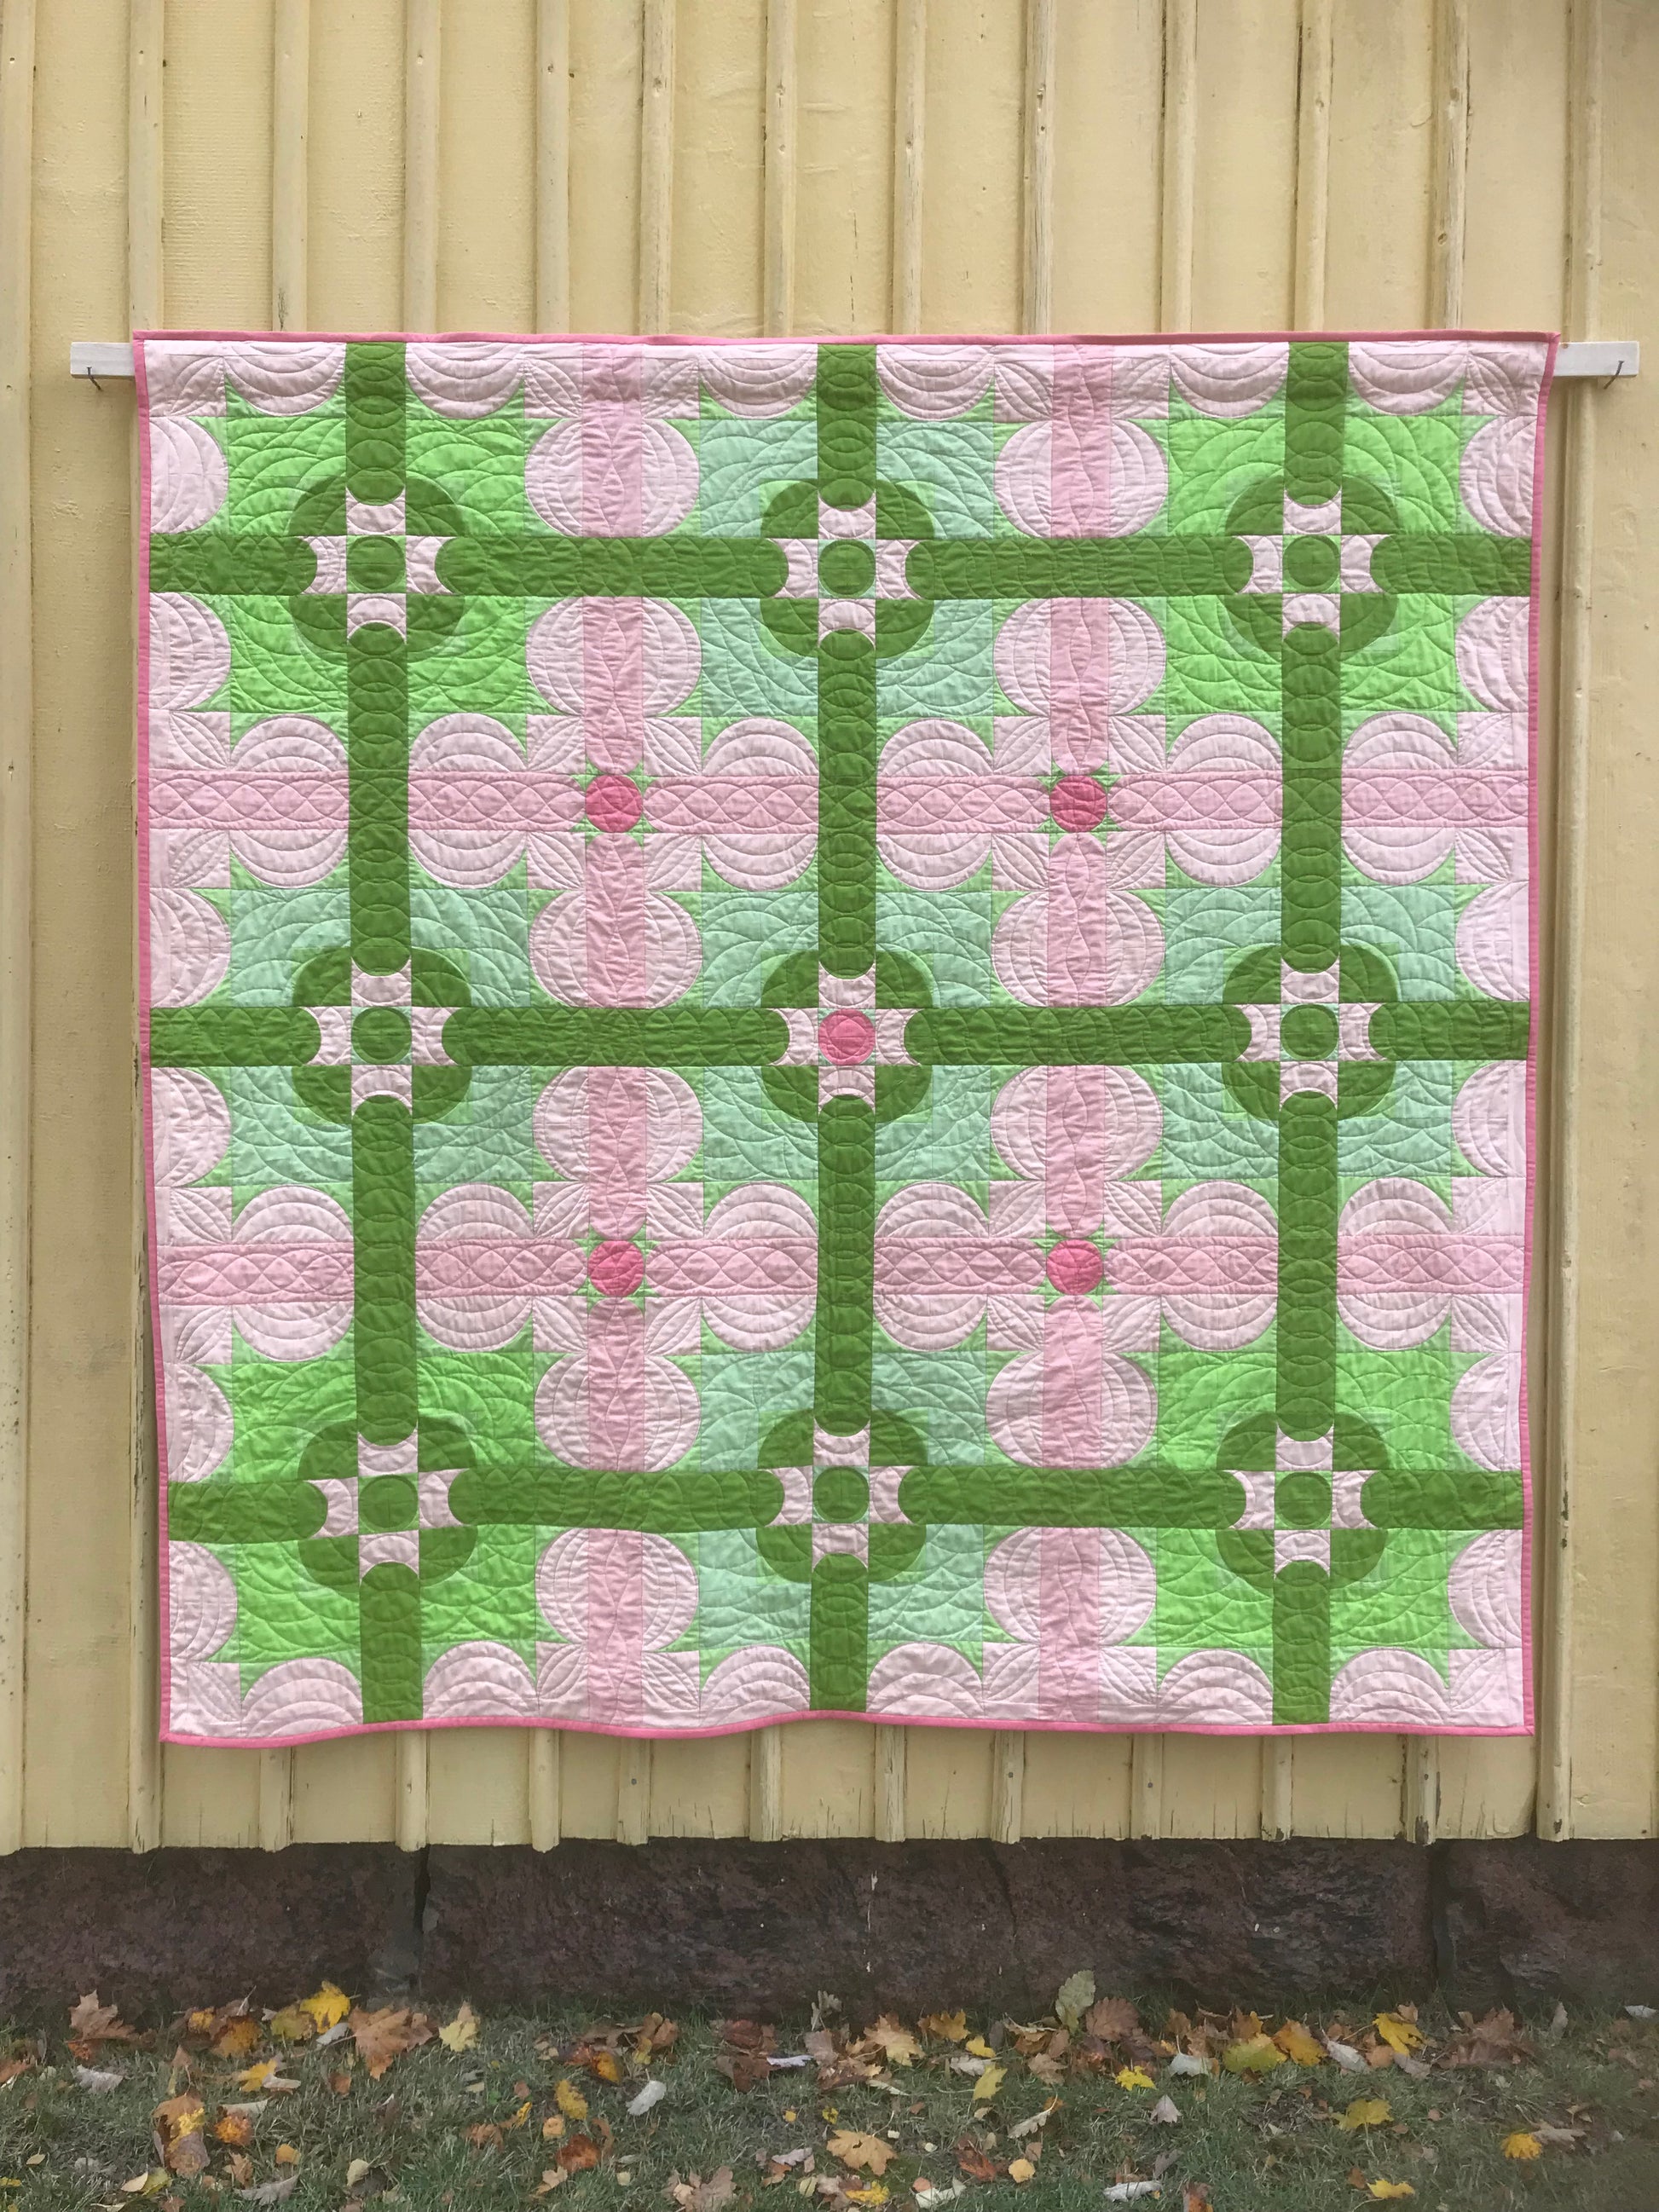 Quiltt against wall showing quilting. 